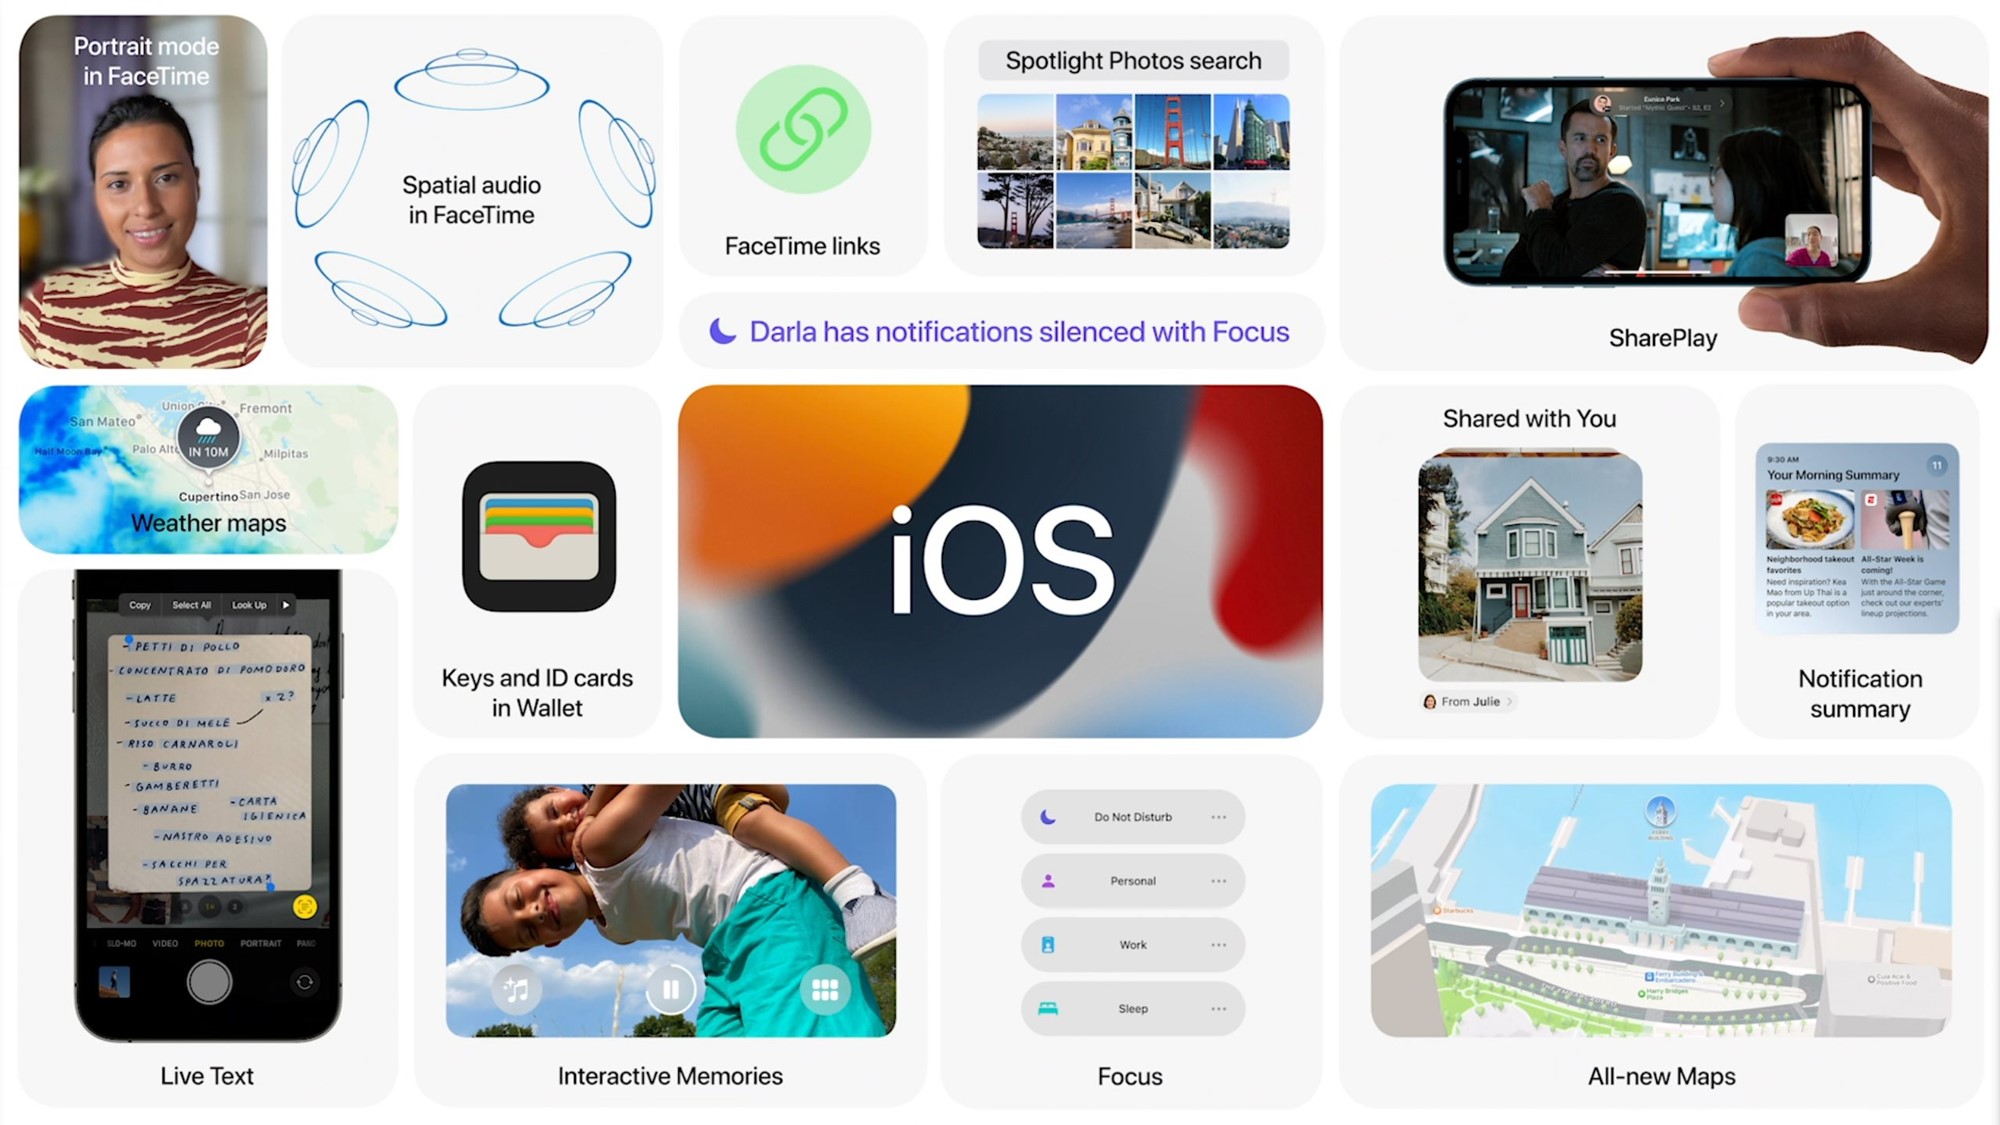 iOS 15: Security updates will be available for download separately

